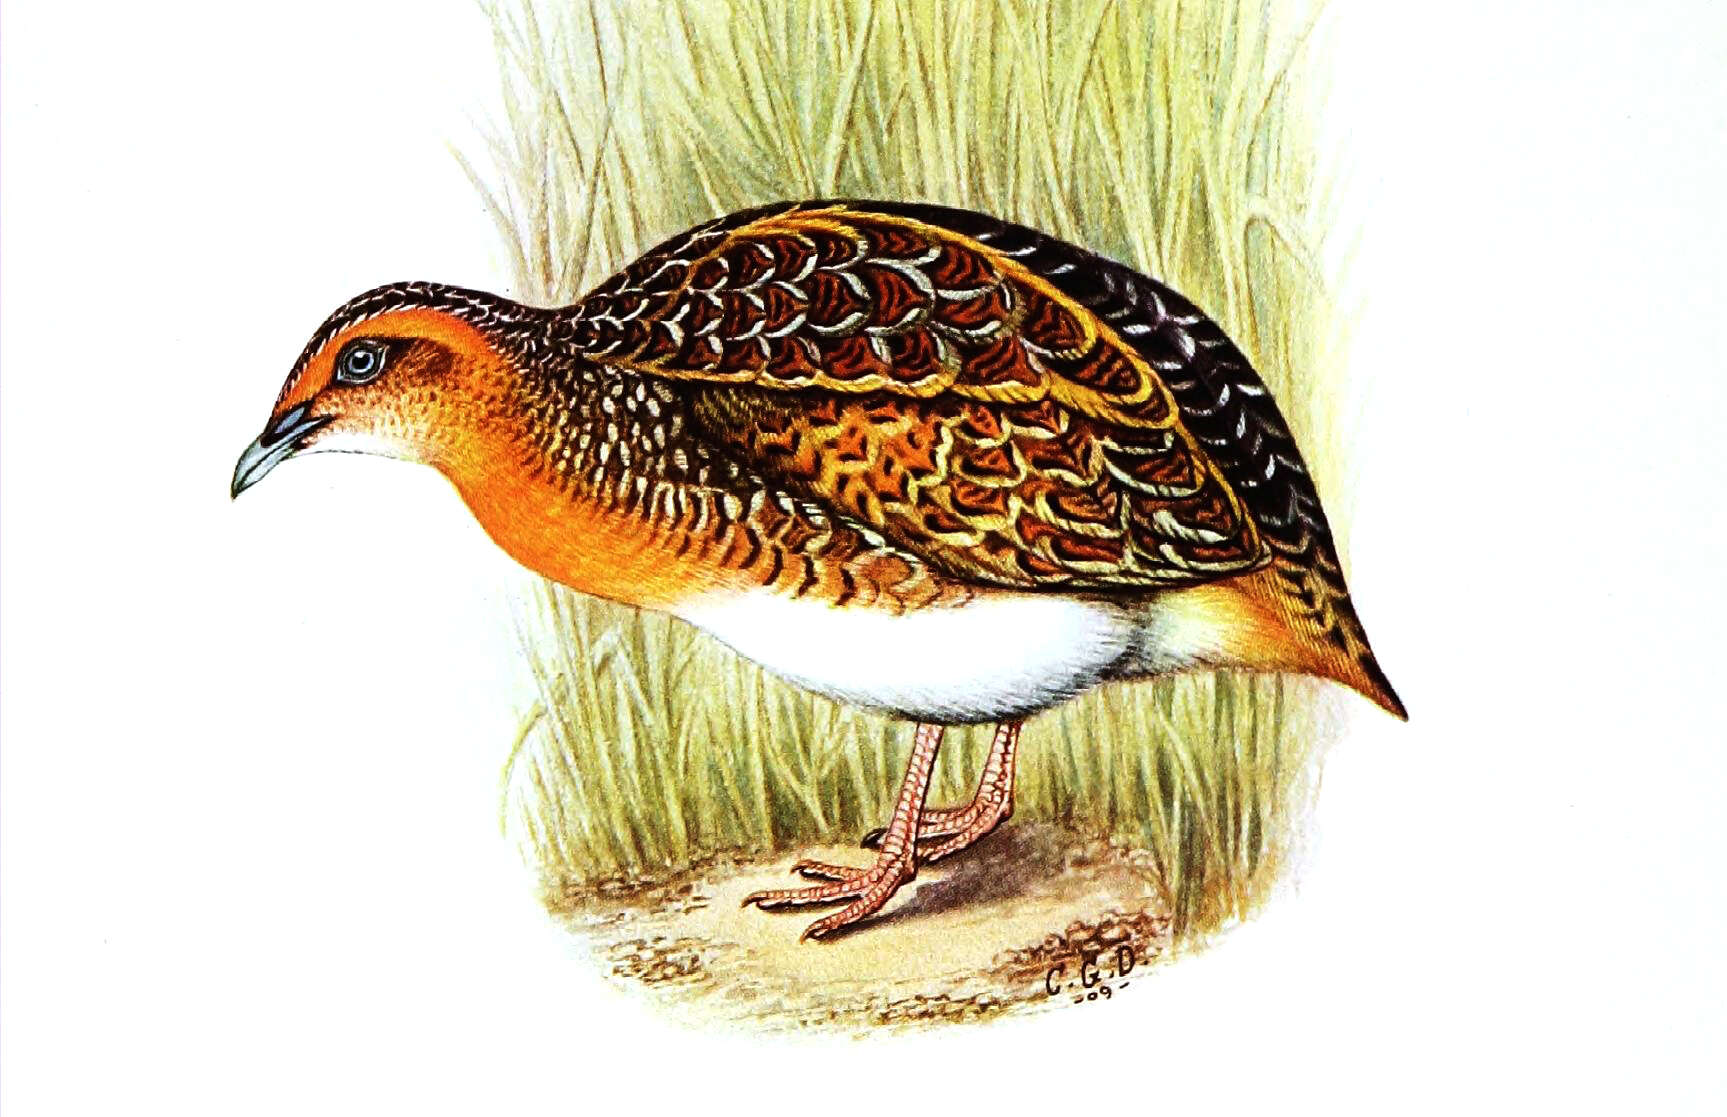 Image of Black-rumped Buttonquail